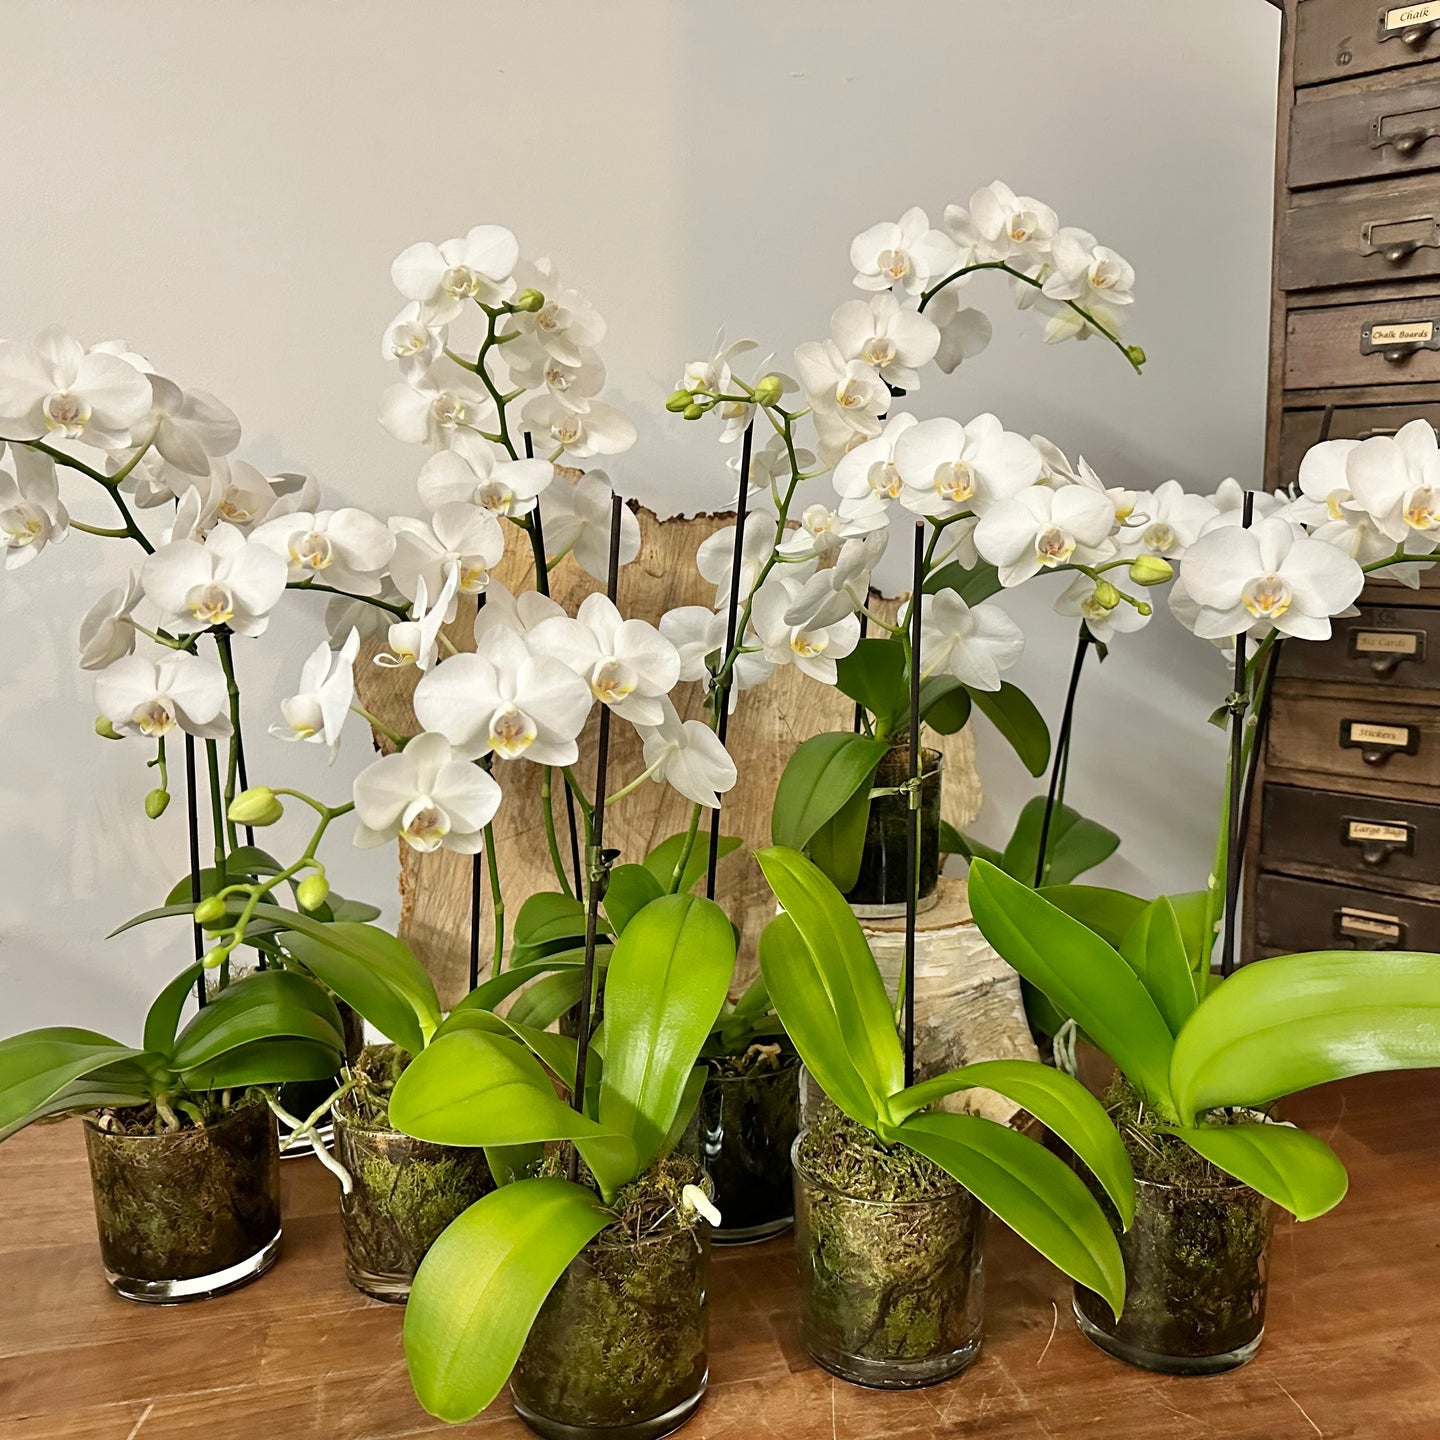 Single Stem Mini Phalaenopsis Orchid, planted with moss in a glass vase. Ready for your home or to gift